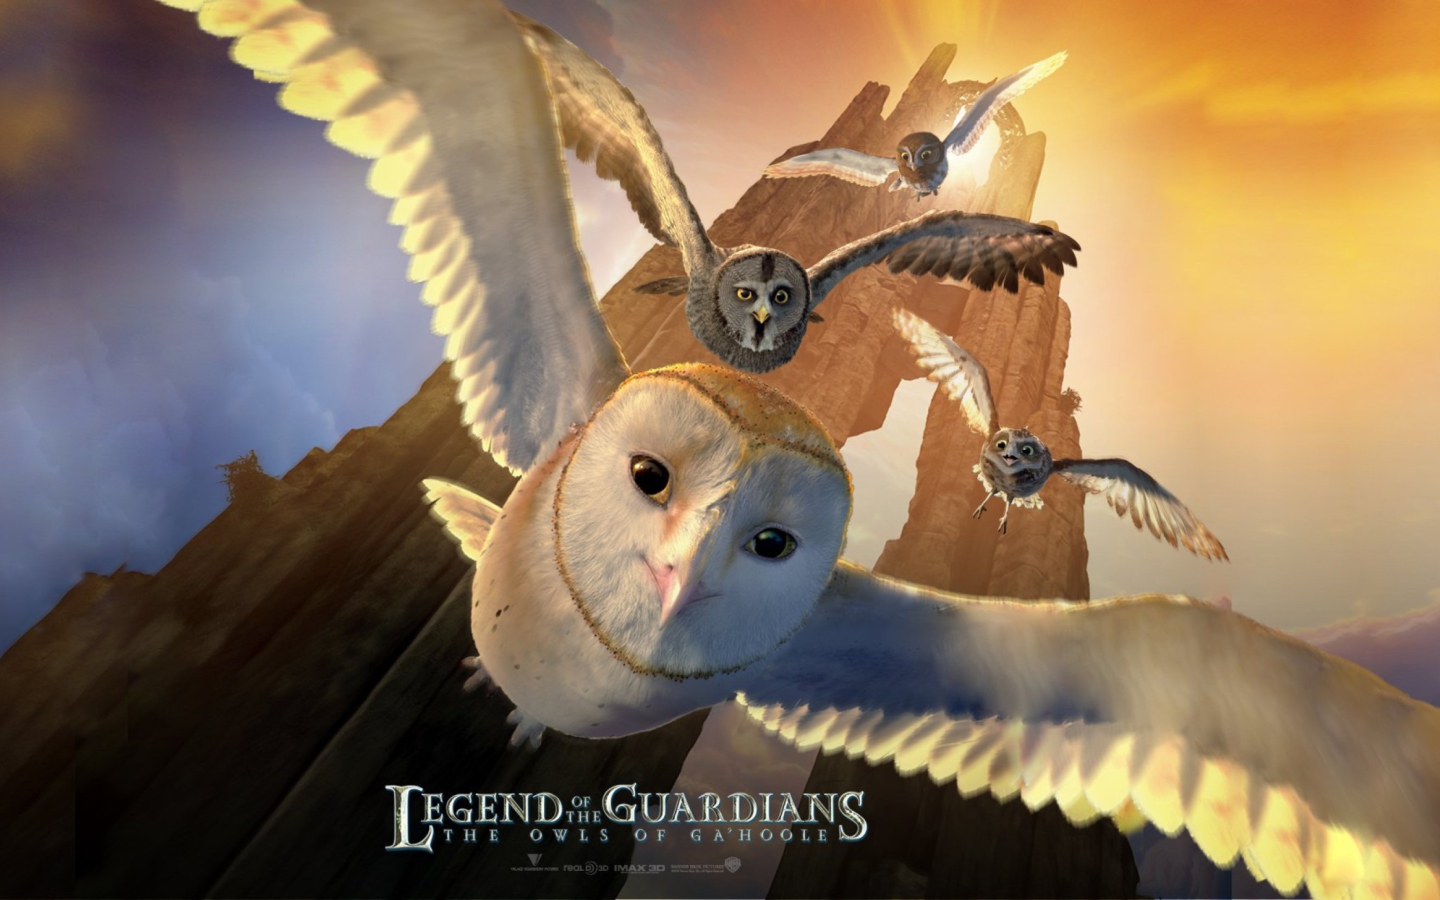 Legend of the Guardians: The Owls of Ga'Hoole wallpaper 1440x900